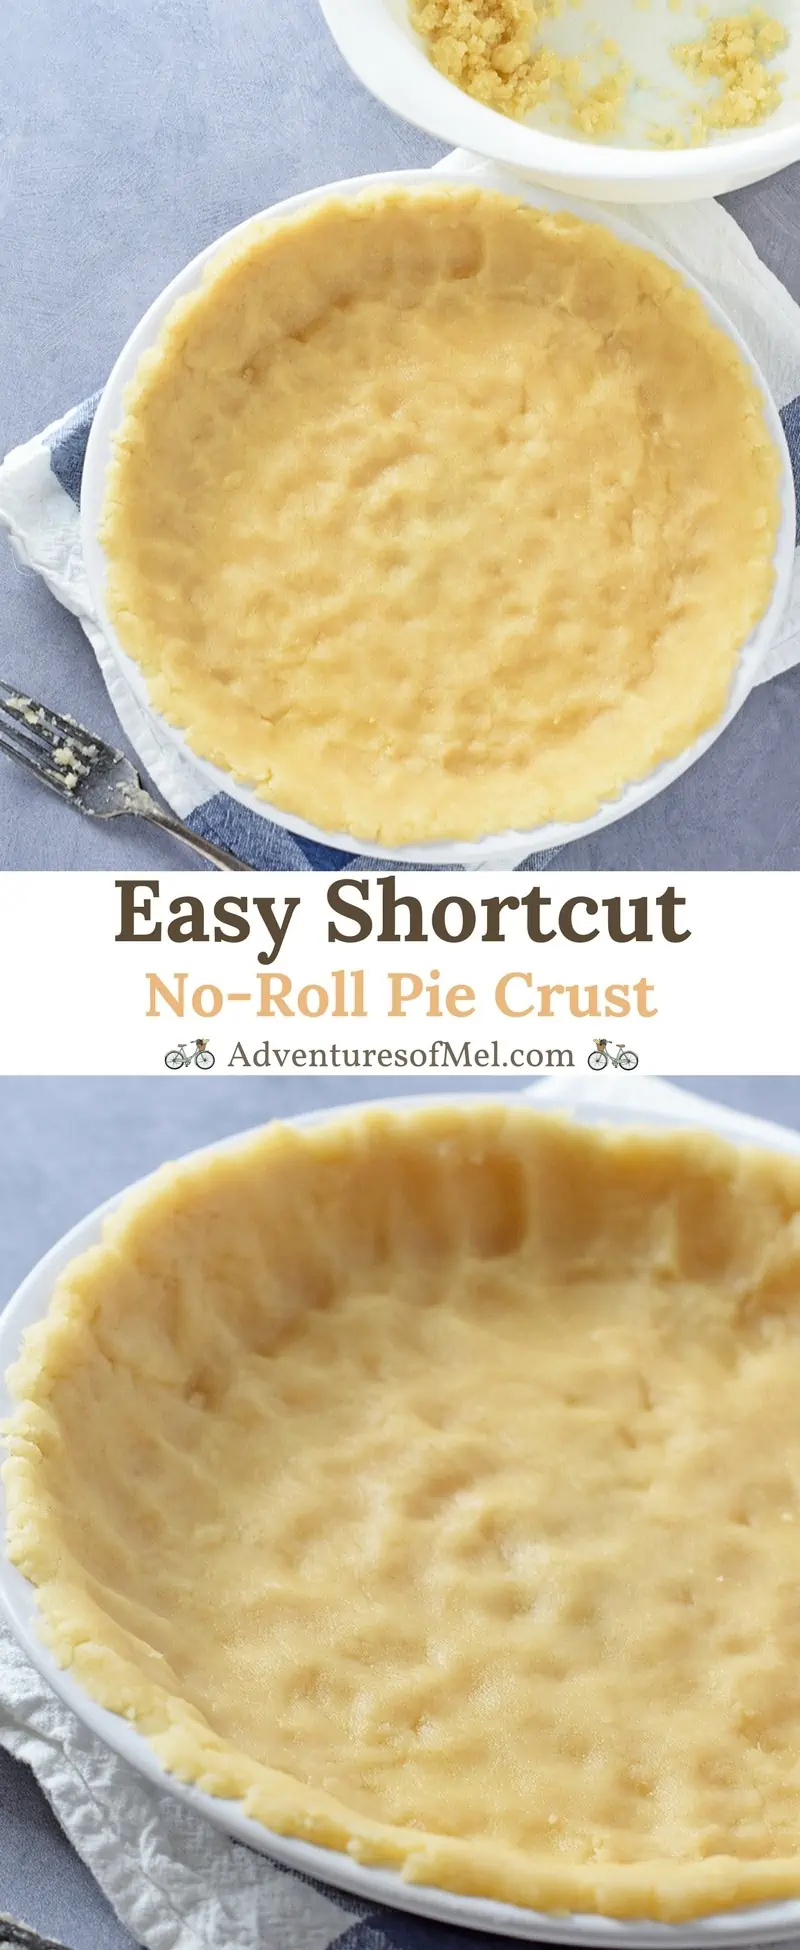 Easy Shortcut No-Roll Pie Crust recipe perfect for fruit pies, custard pie, and more. Made with oil, mix and press into a pie plate for a delicious homemade crust.